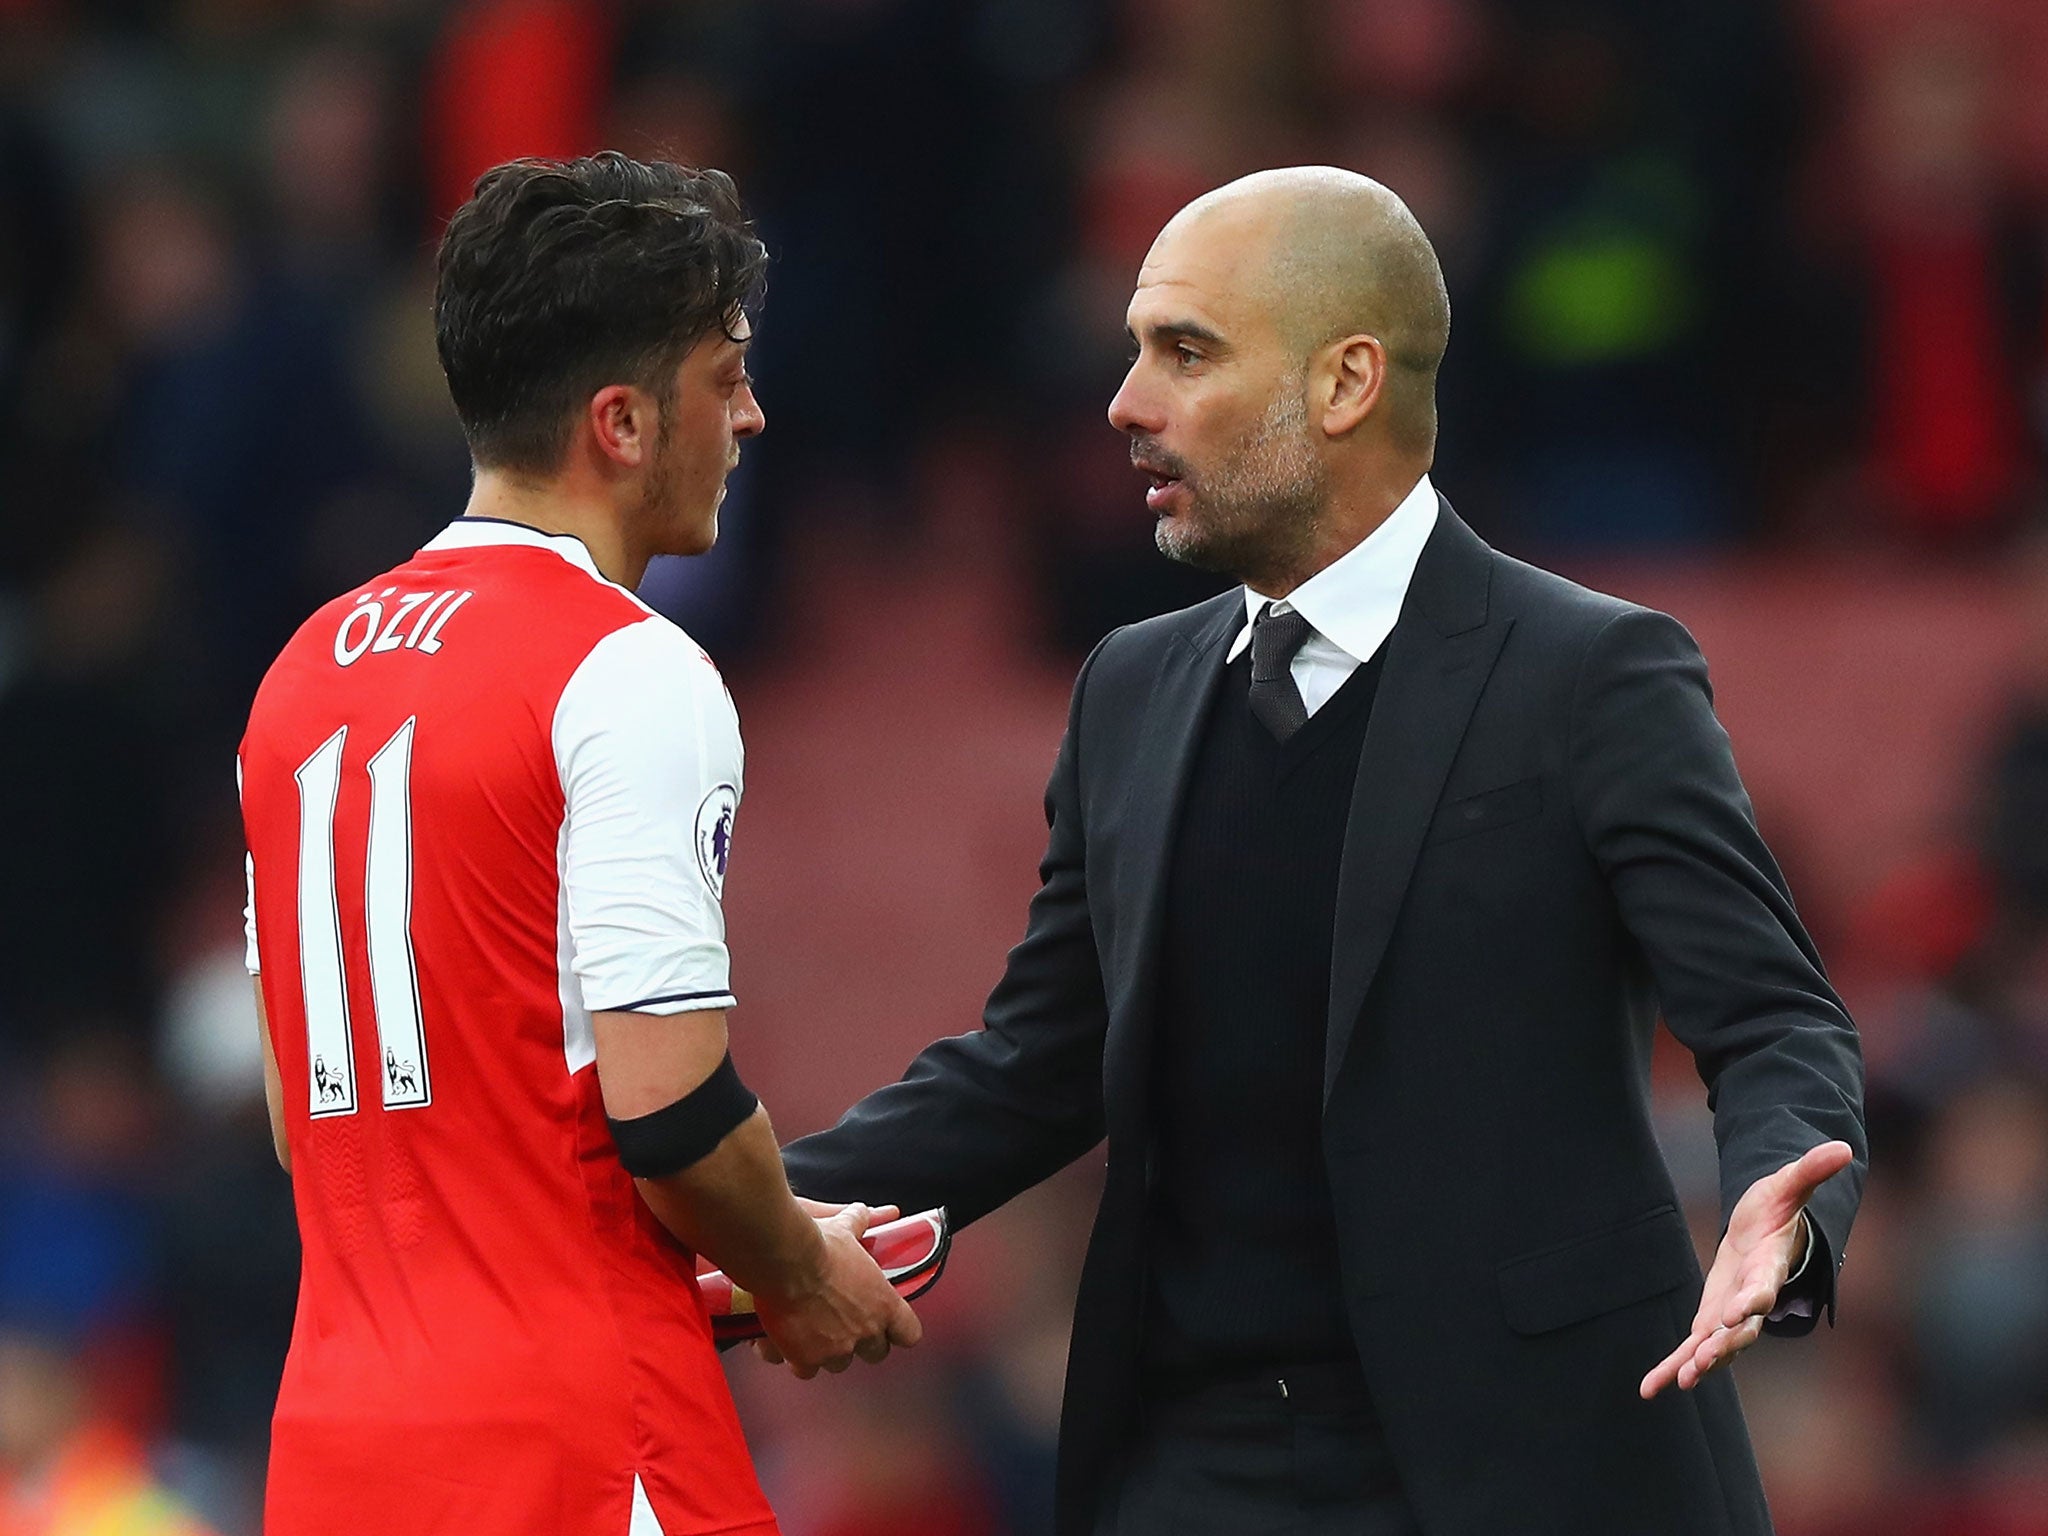 Pep Guardiola speaks to Mesut Ozil after the final whistle